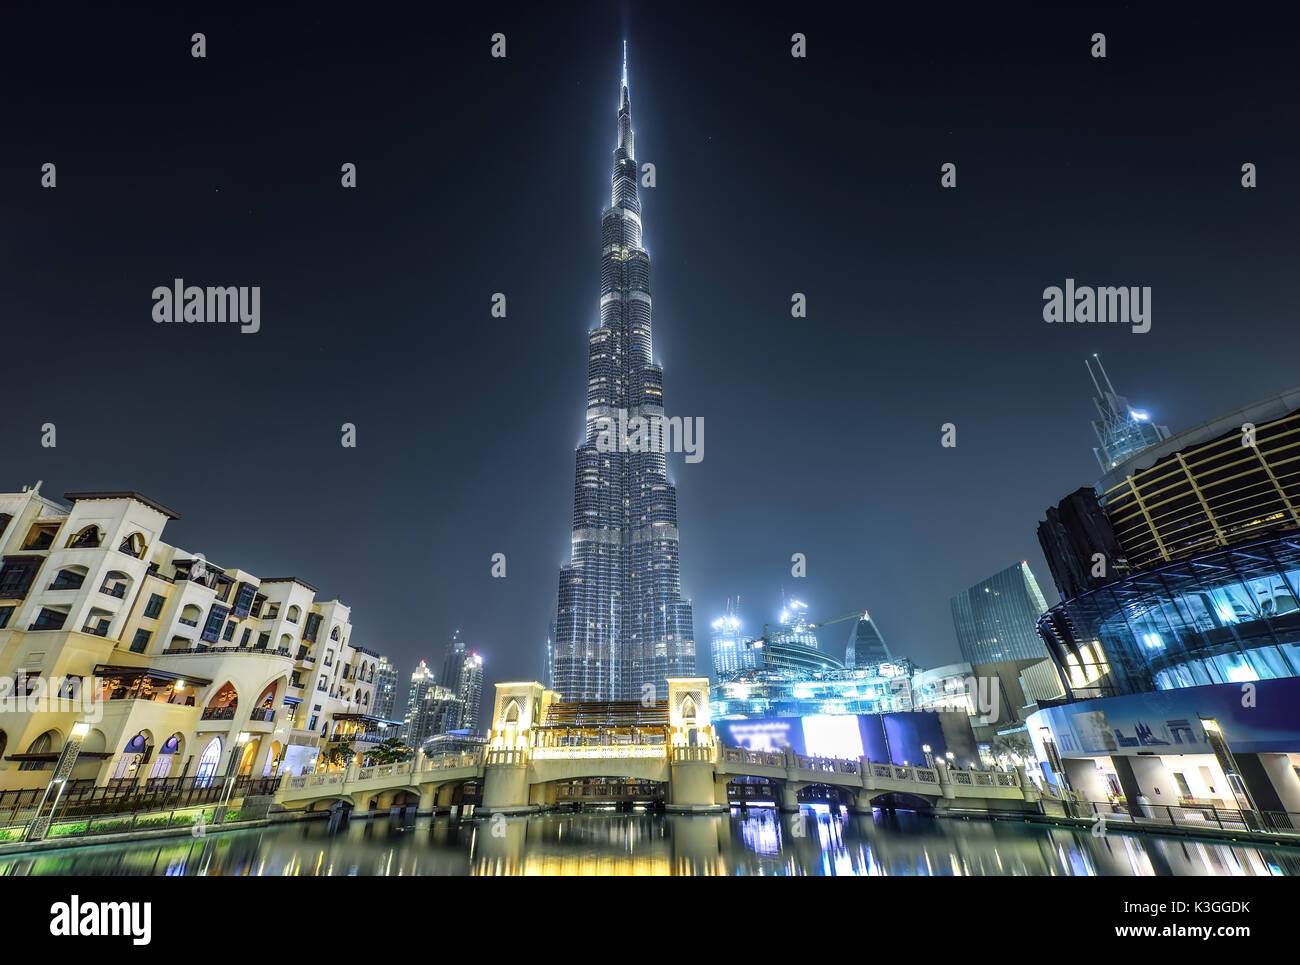 DUBAI, UNITED ARAB EMIRATES - Oct 7, 2016: The Burj Khalifa tower at night. This skyscraper is the tallest man-made structure in the world, measuring  Stock Photo